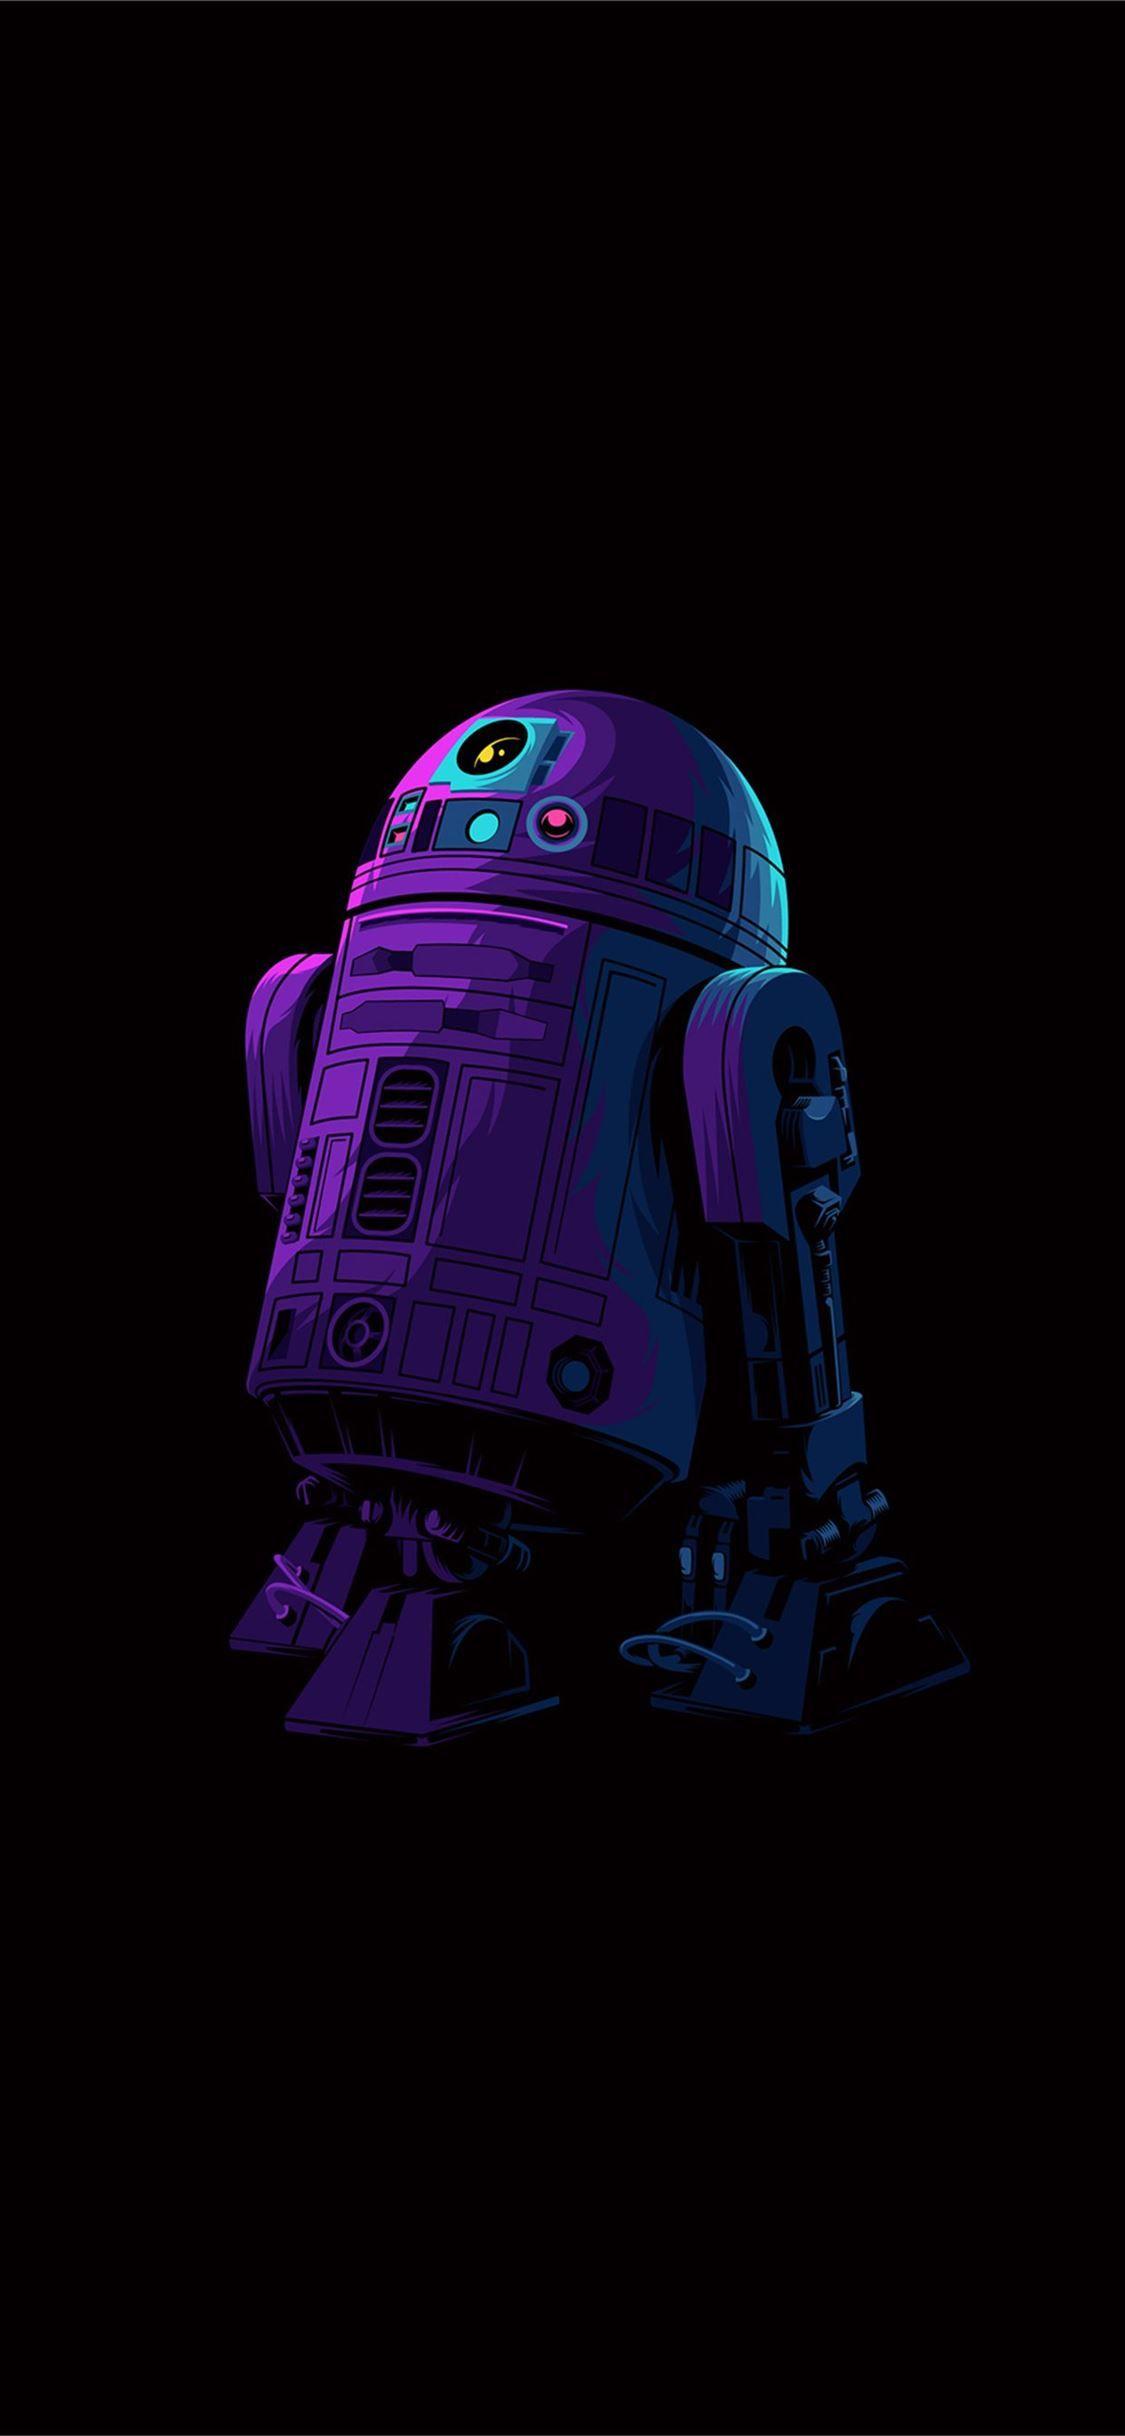 R2-D2 iPhone Wallpapers - Top Free R2 ...